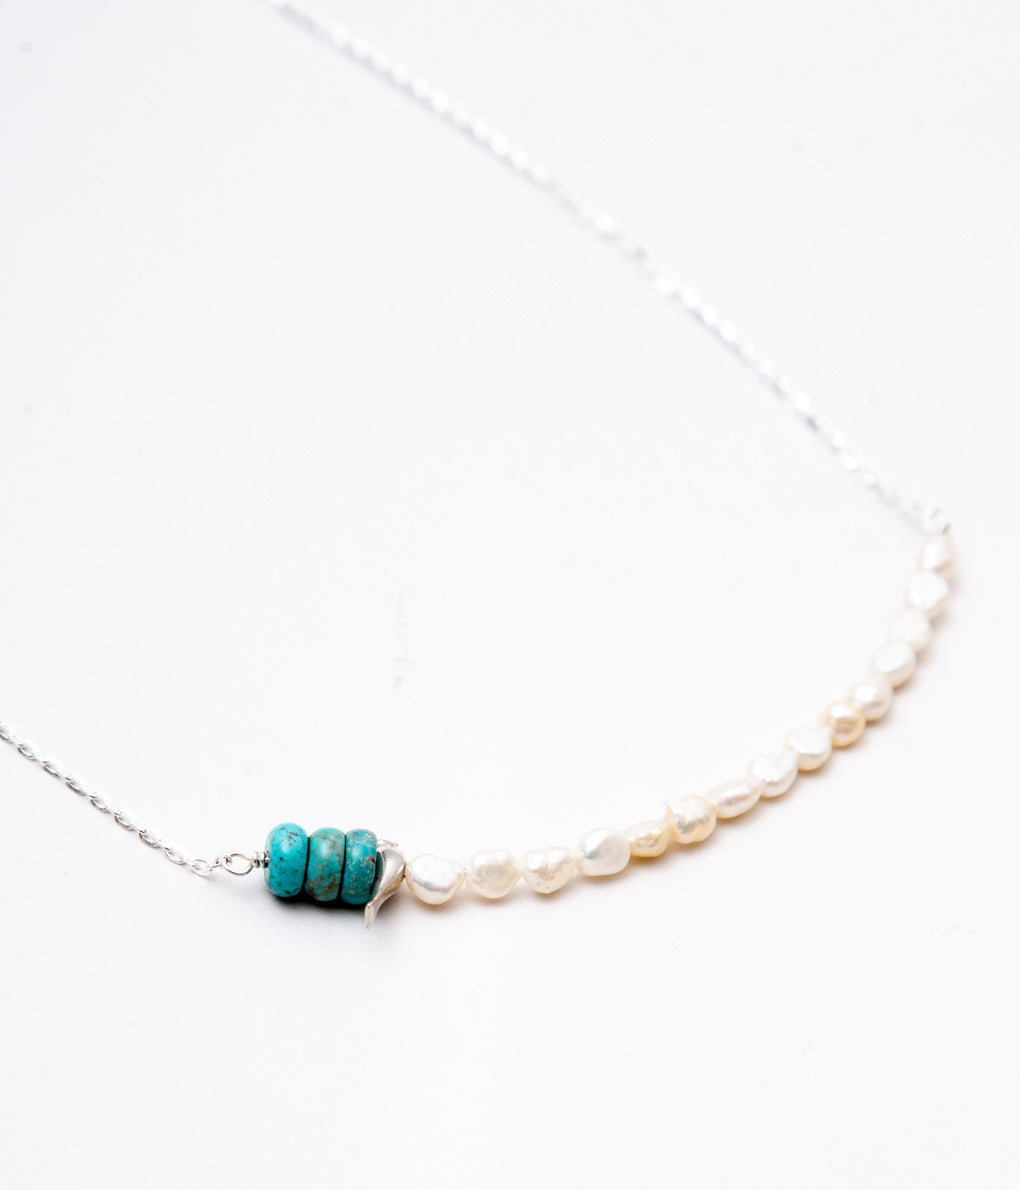 DINEH "BLUEBIRD FETISH NECKLACE WITH W/WHITE PEARLS & KINGMAN TURQUOISE "(STERLING SILVER)